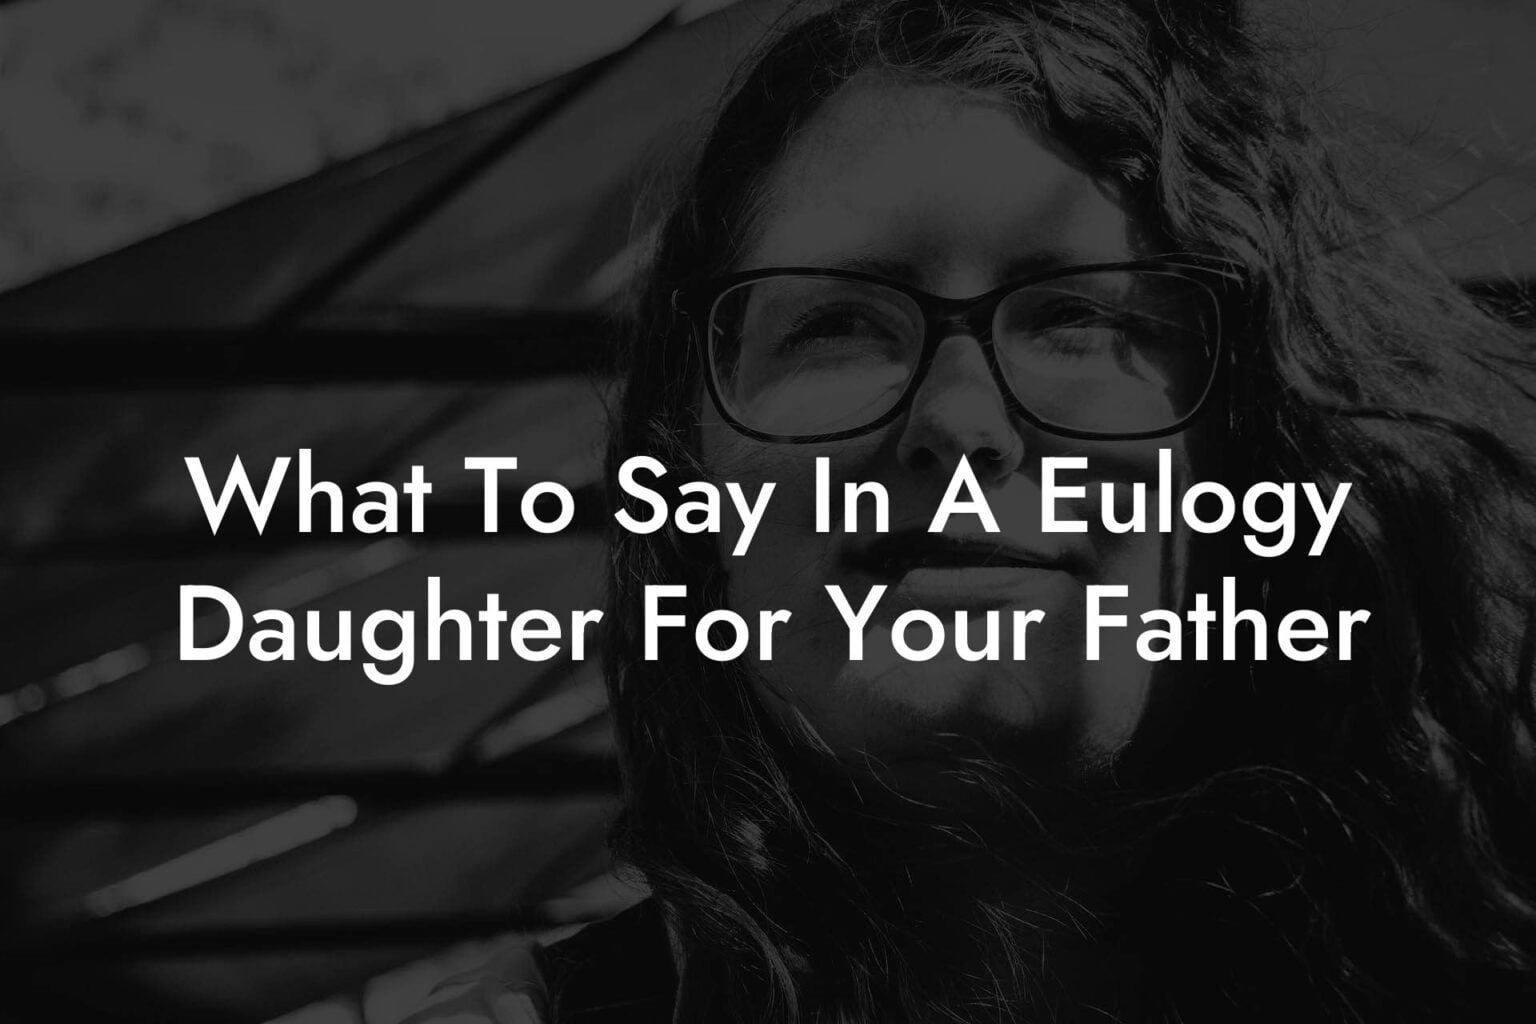 what-to-say-in-a-eulogy-daughter-for-your-father-eulogy-assistant